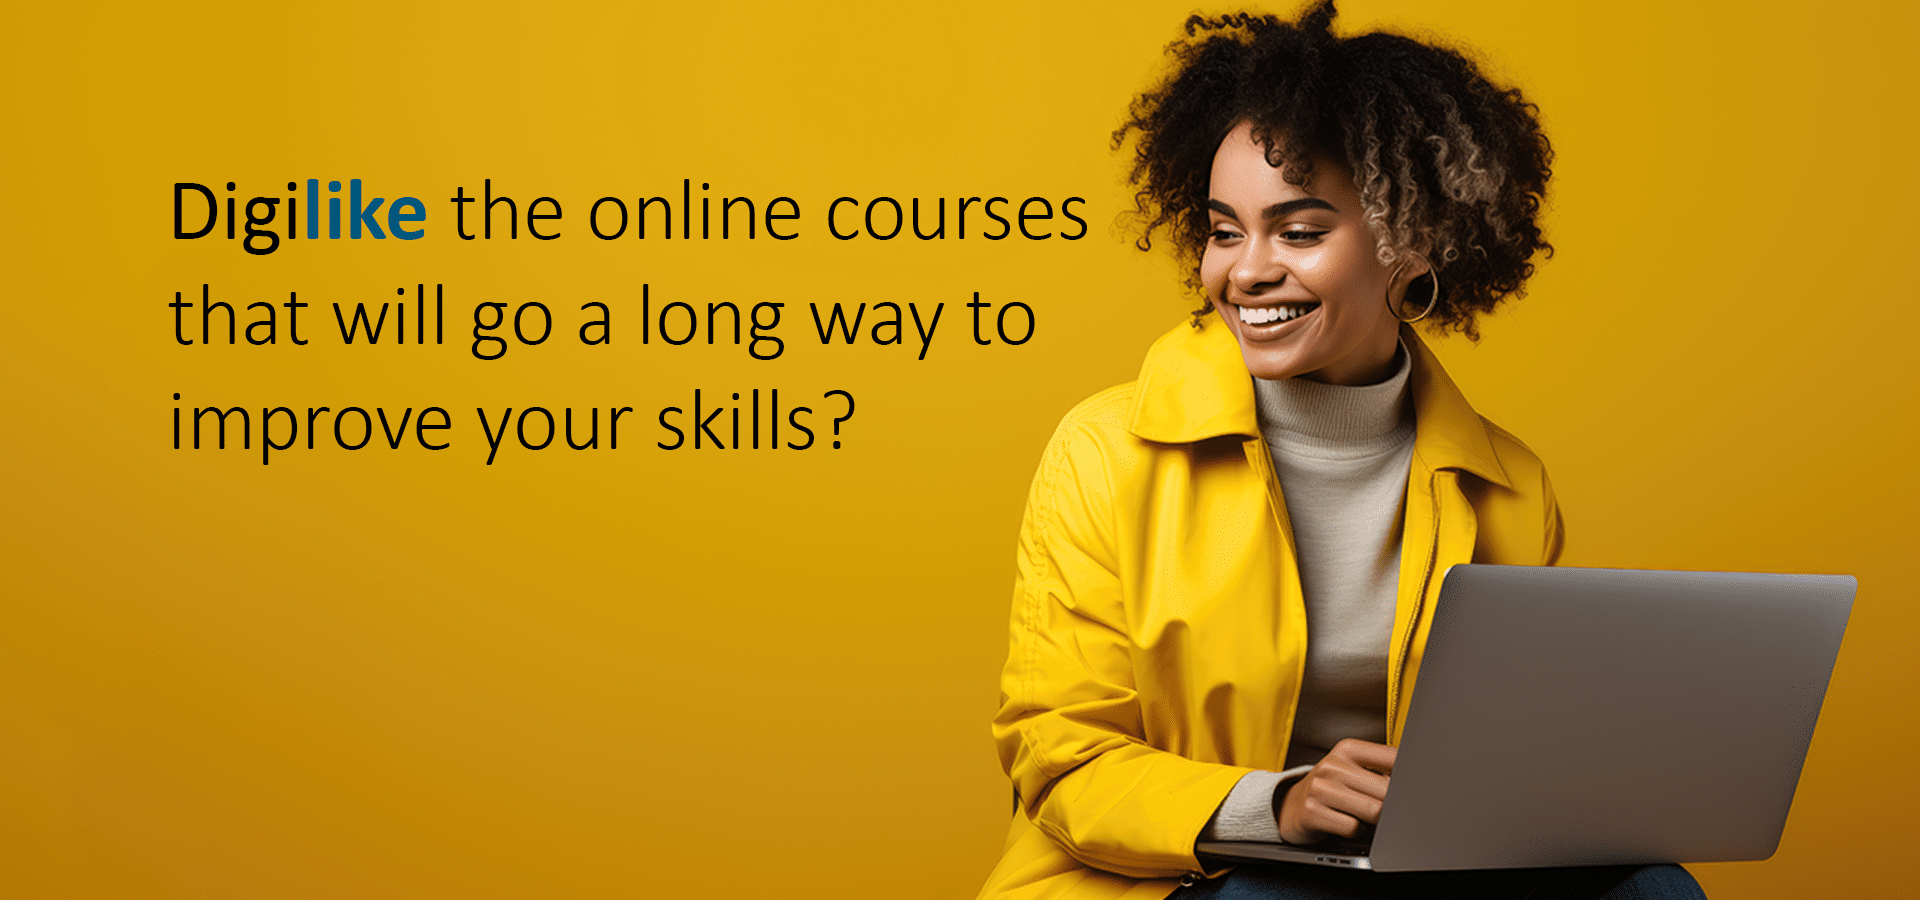 Digitay Graphic - Digilike the online courses that will go a long way to improve your skills?